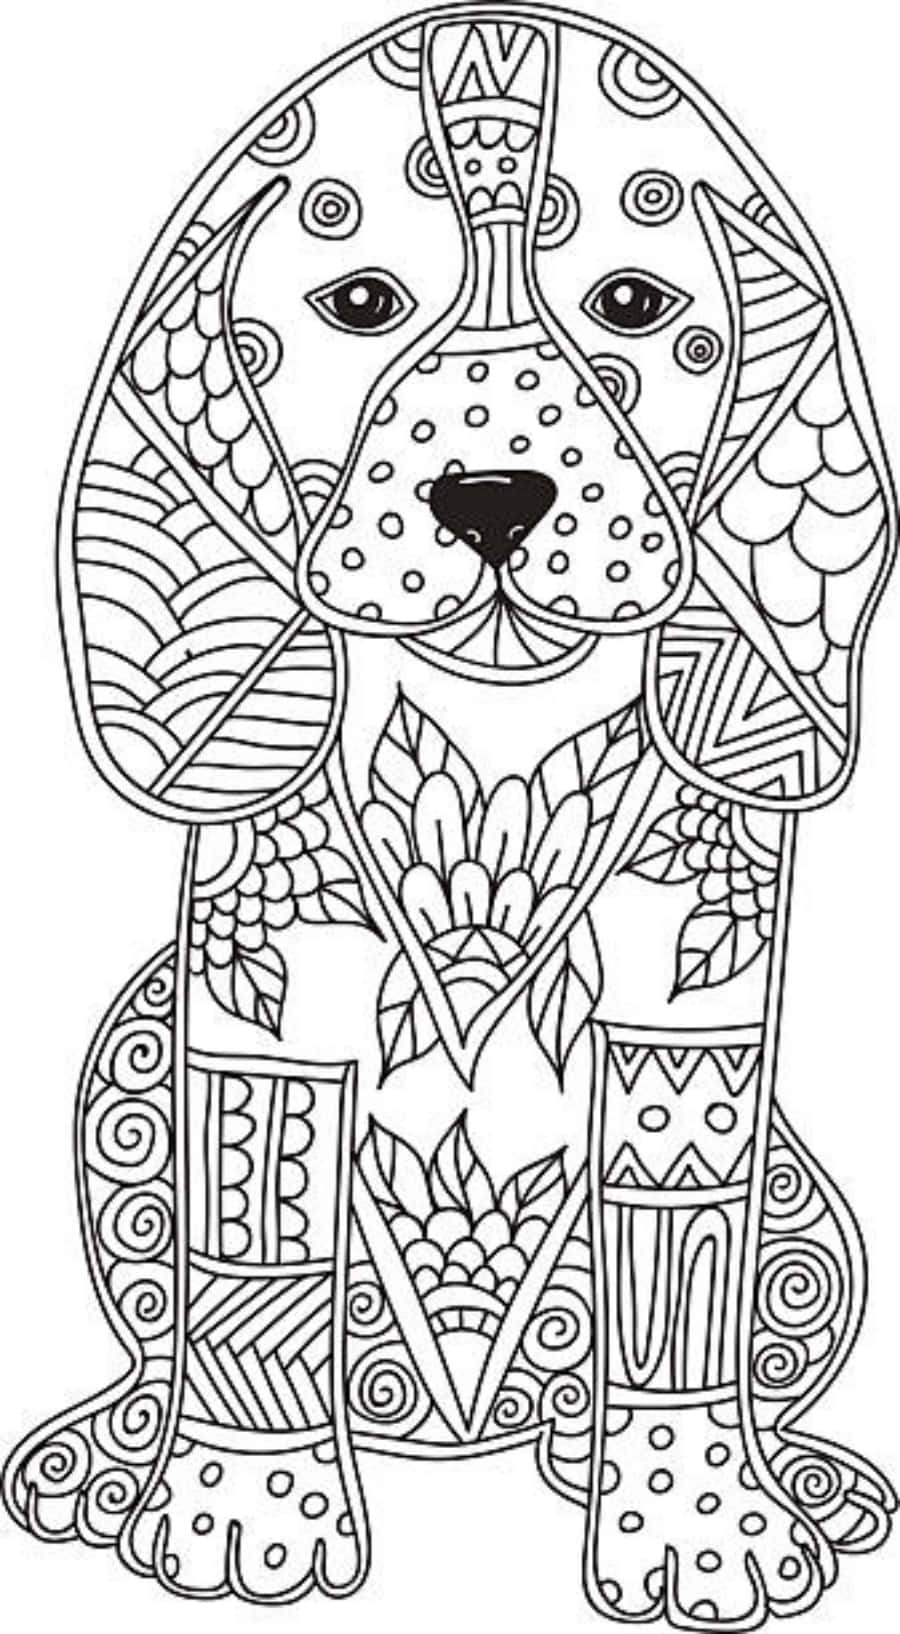 Beagle Dog Doodle Coloring Activity Picture